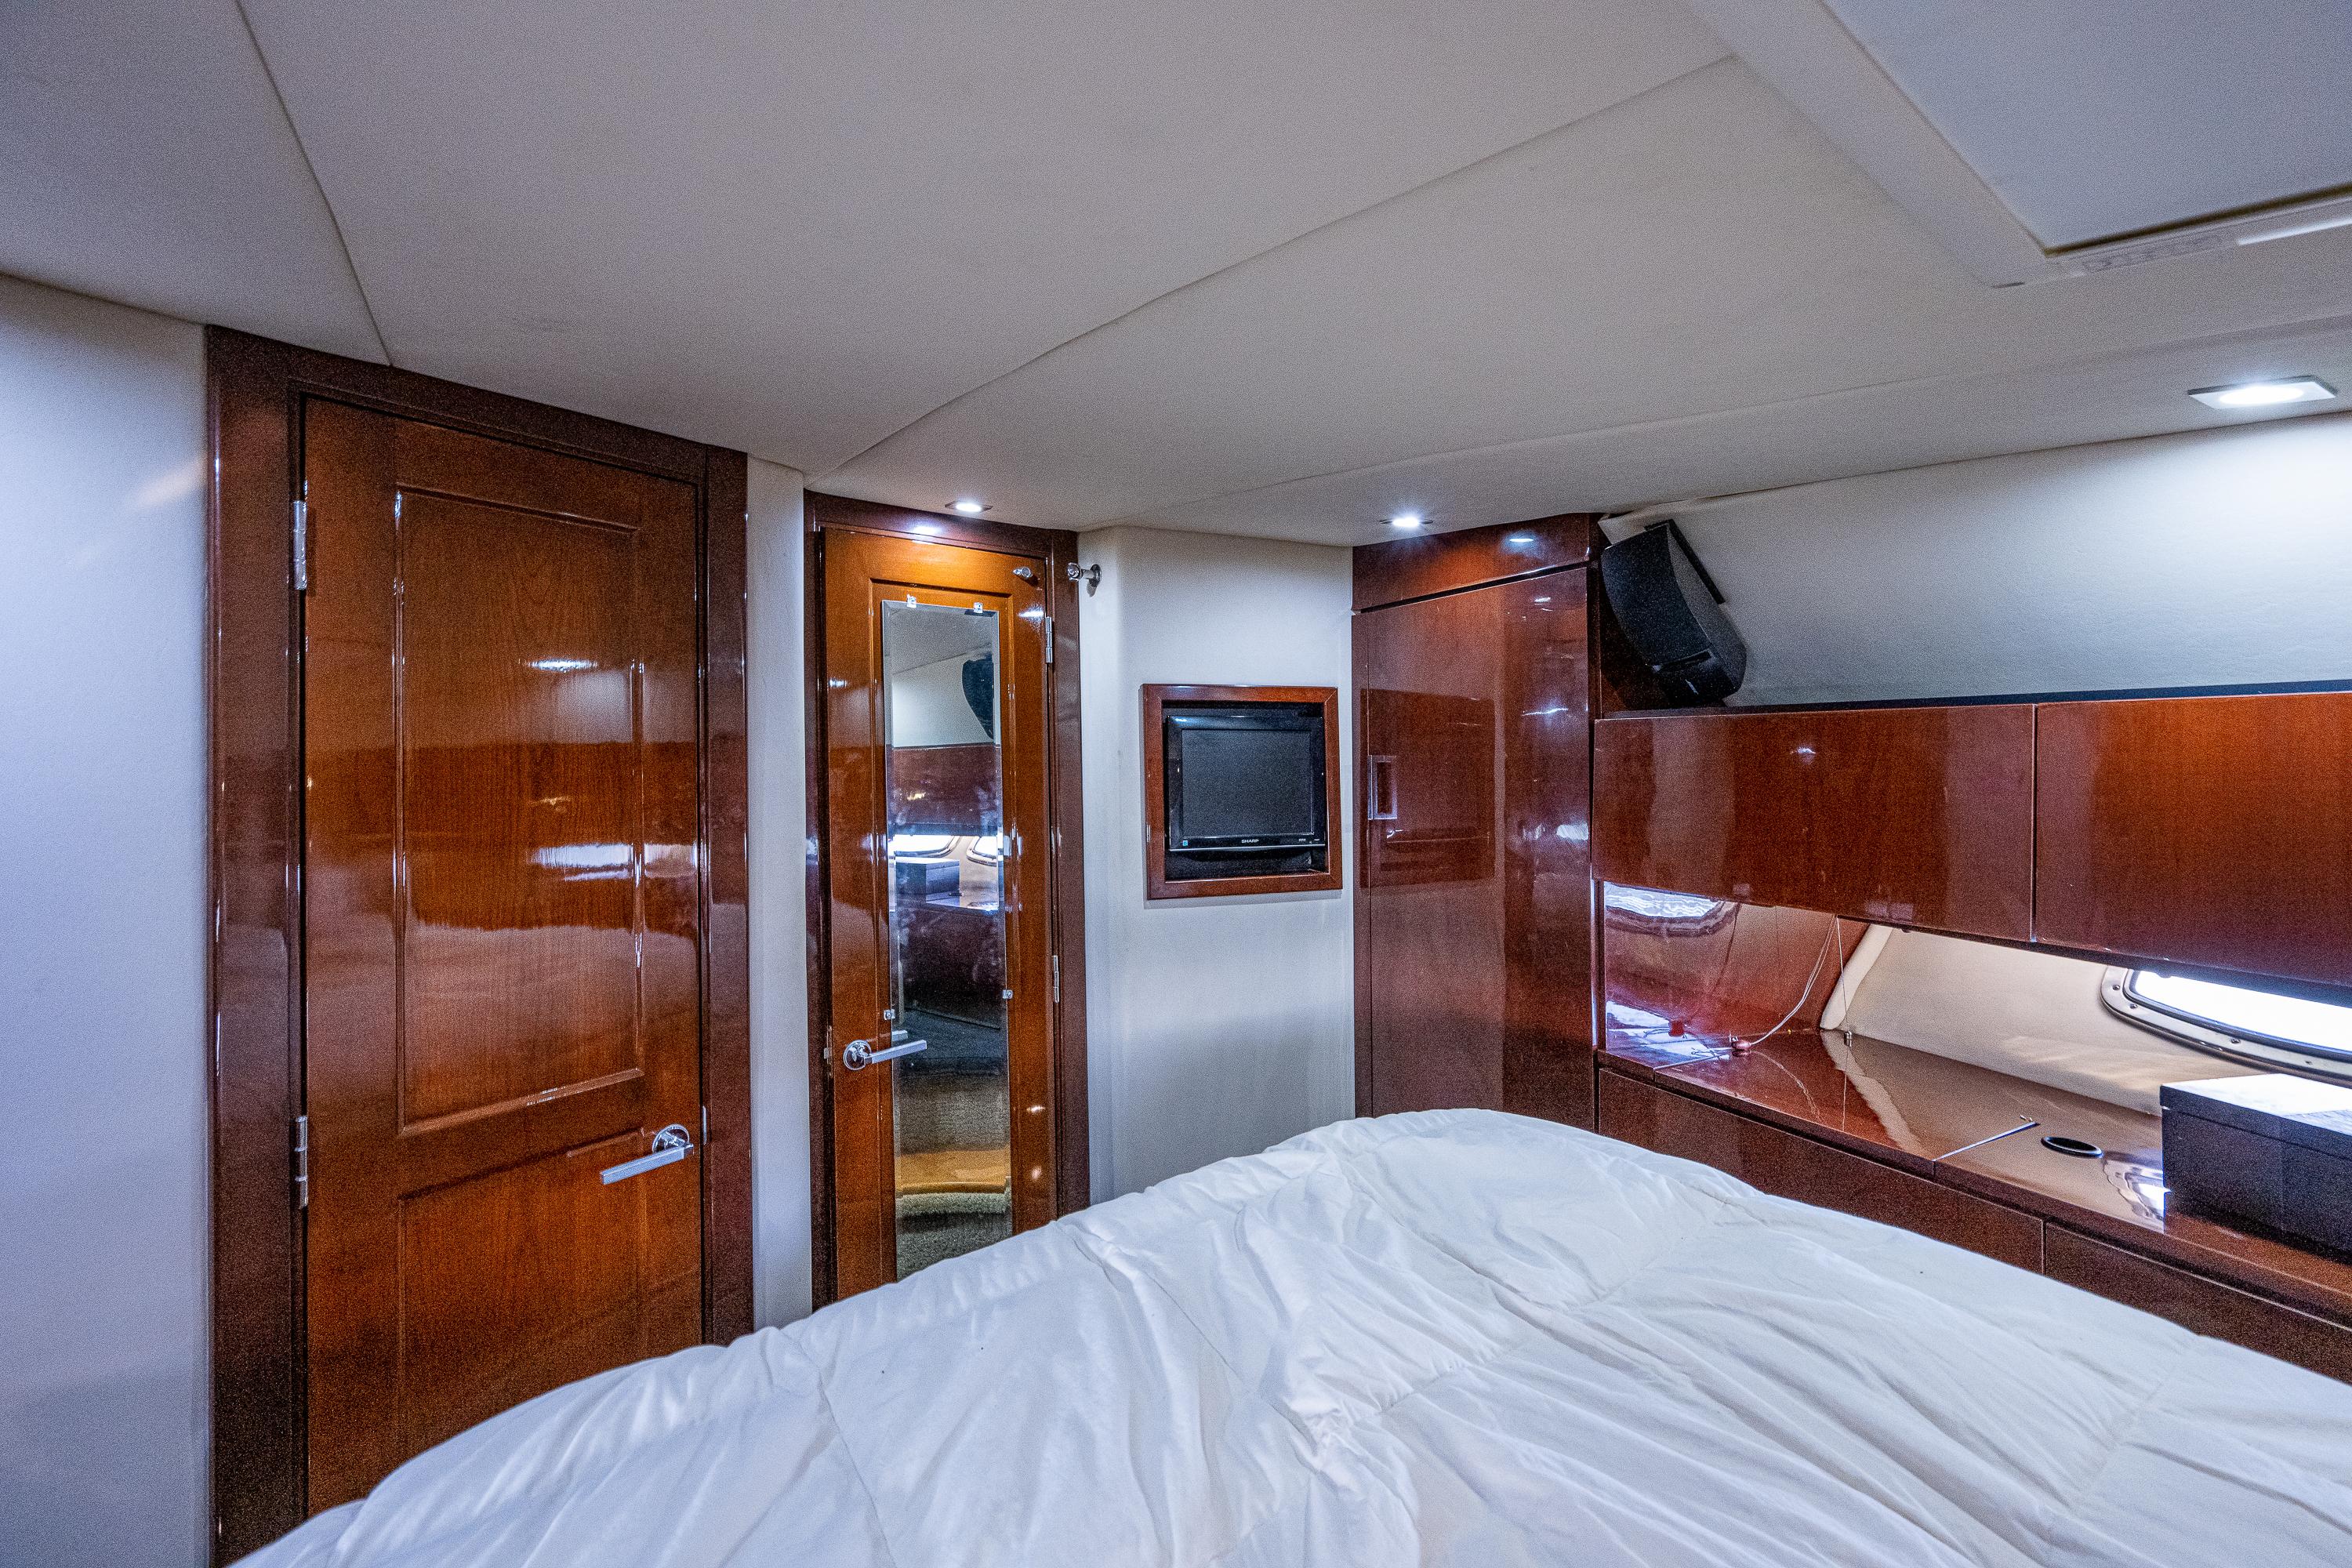 Sea Ray 47 Pirate Moon - Forward Stateroom, Queen Berth